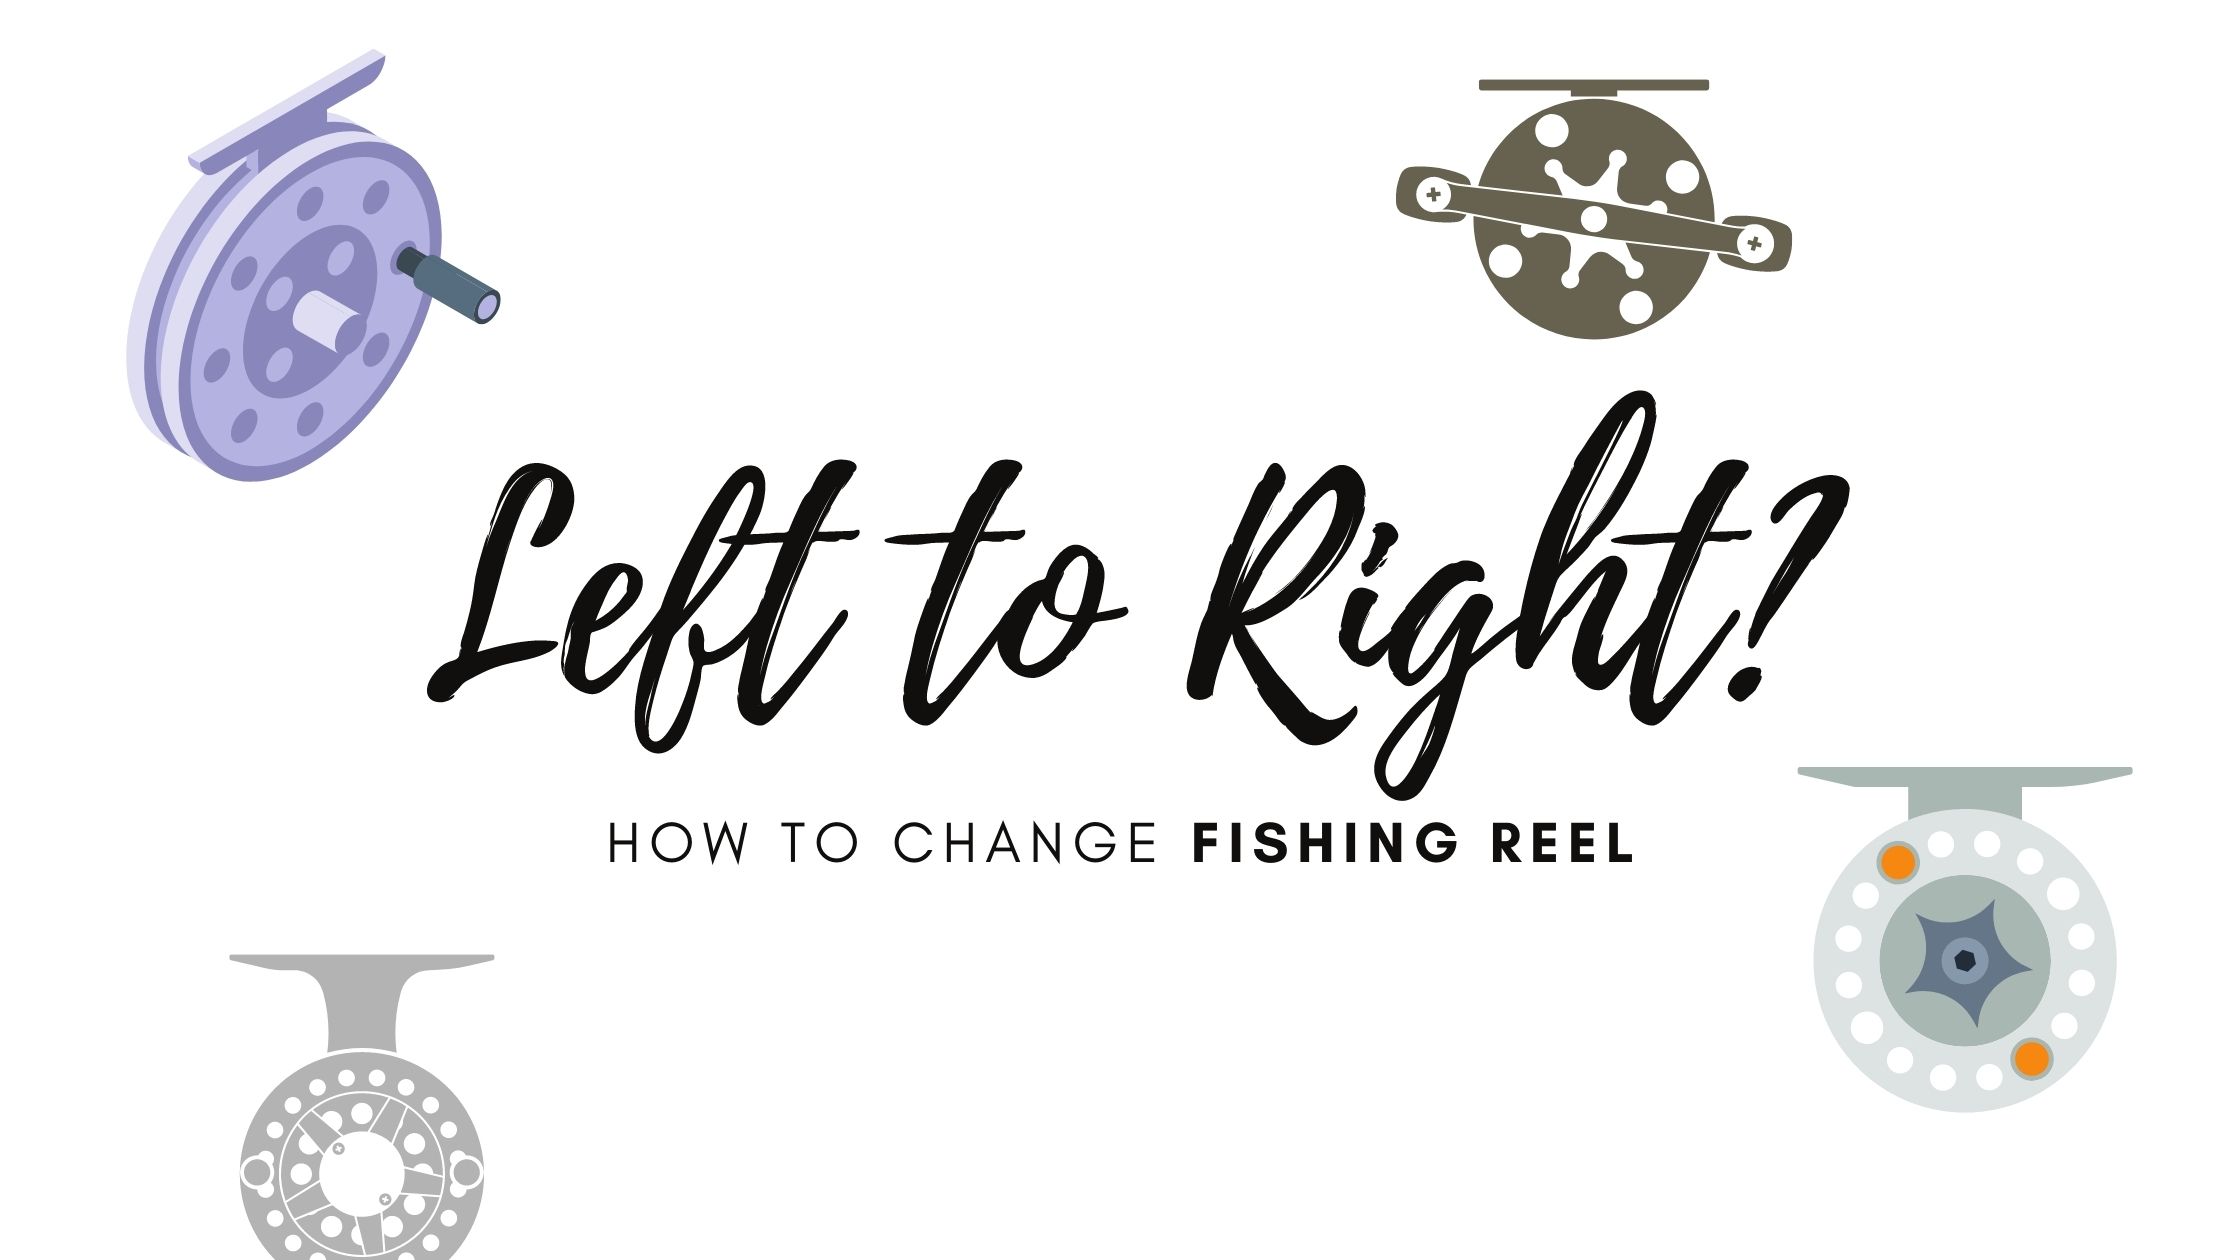 How to Change Fishing Reel From Left to Right?